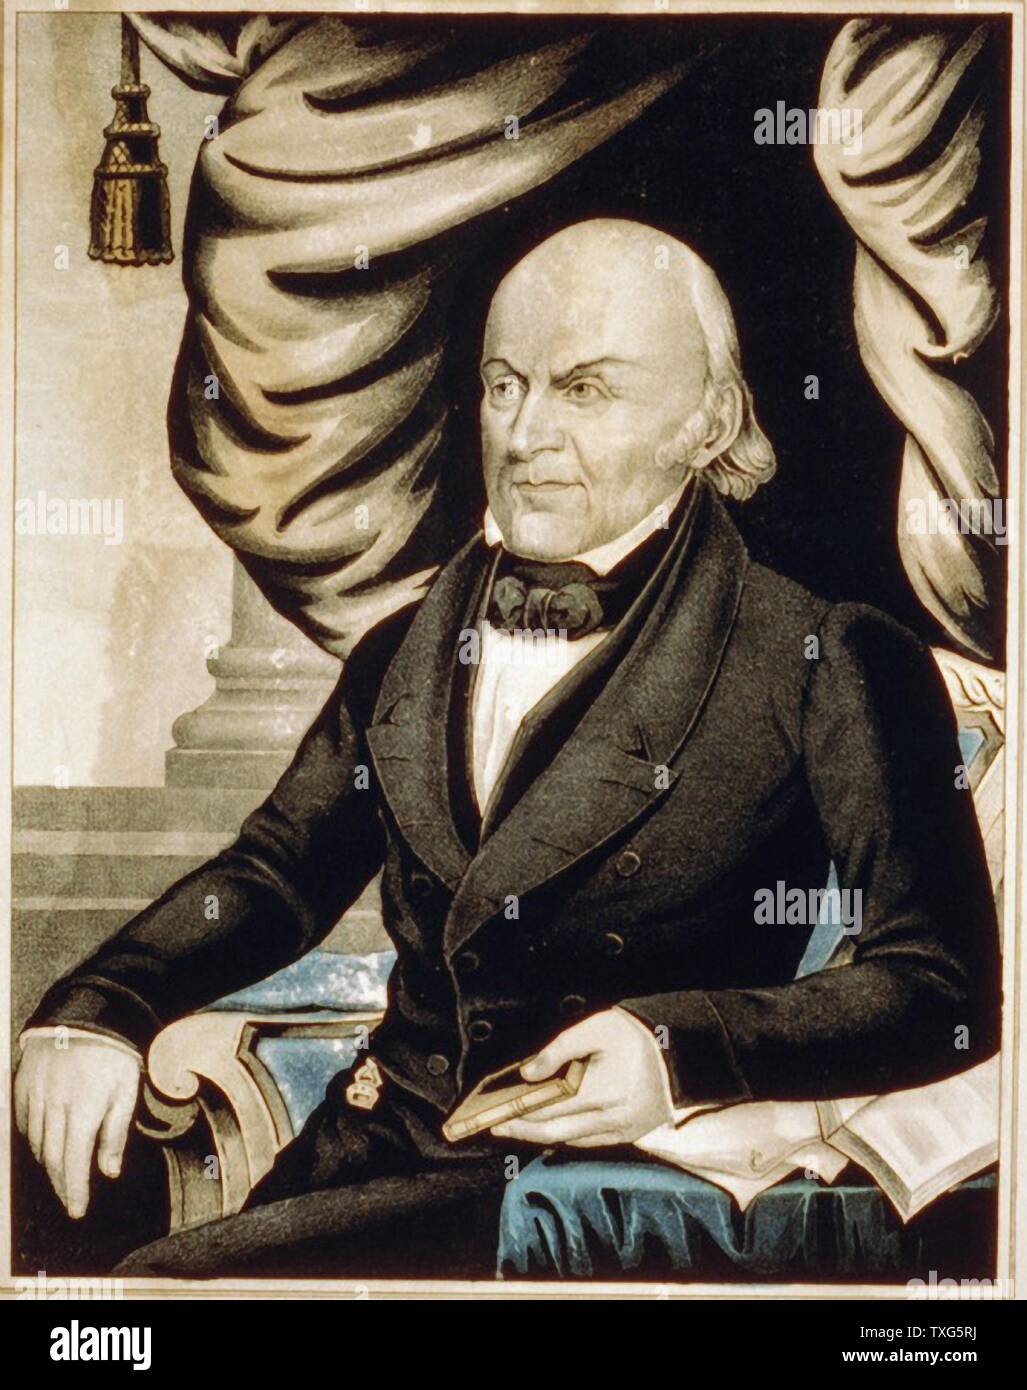 John Quincy Adams, American diplomat and Sixth President of the United States (1825-1829)    Currier & Ives lithograph. Stock Photo